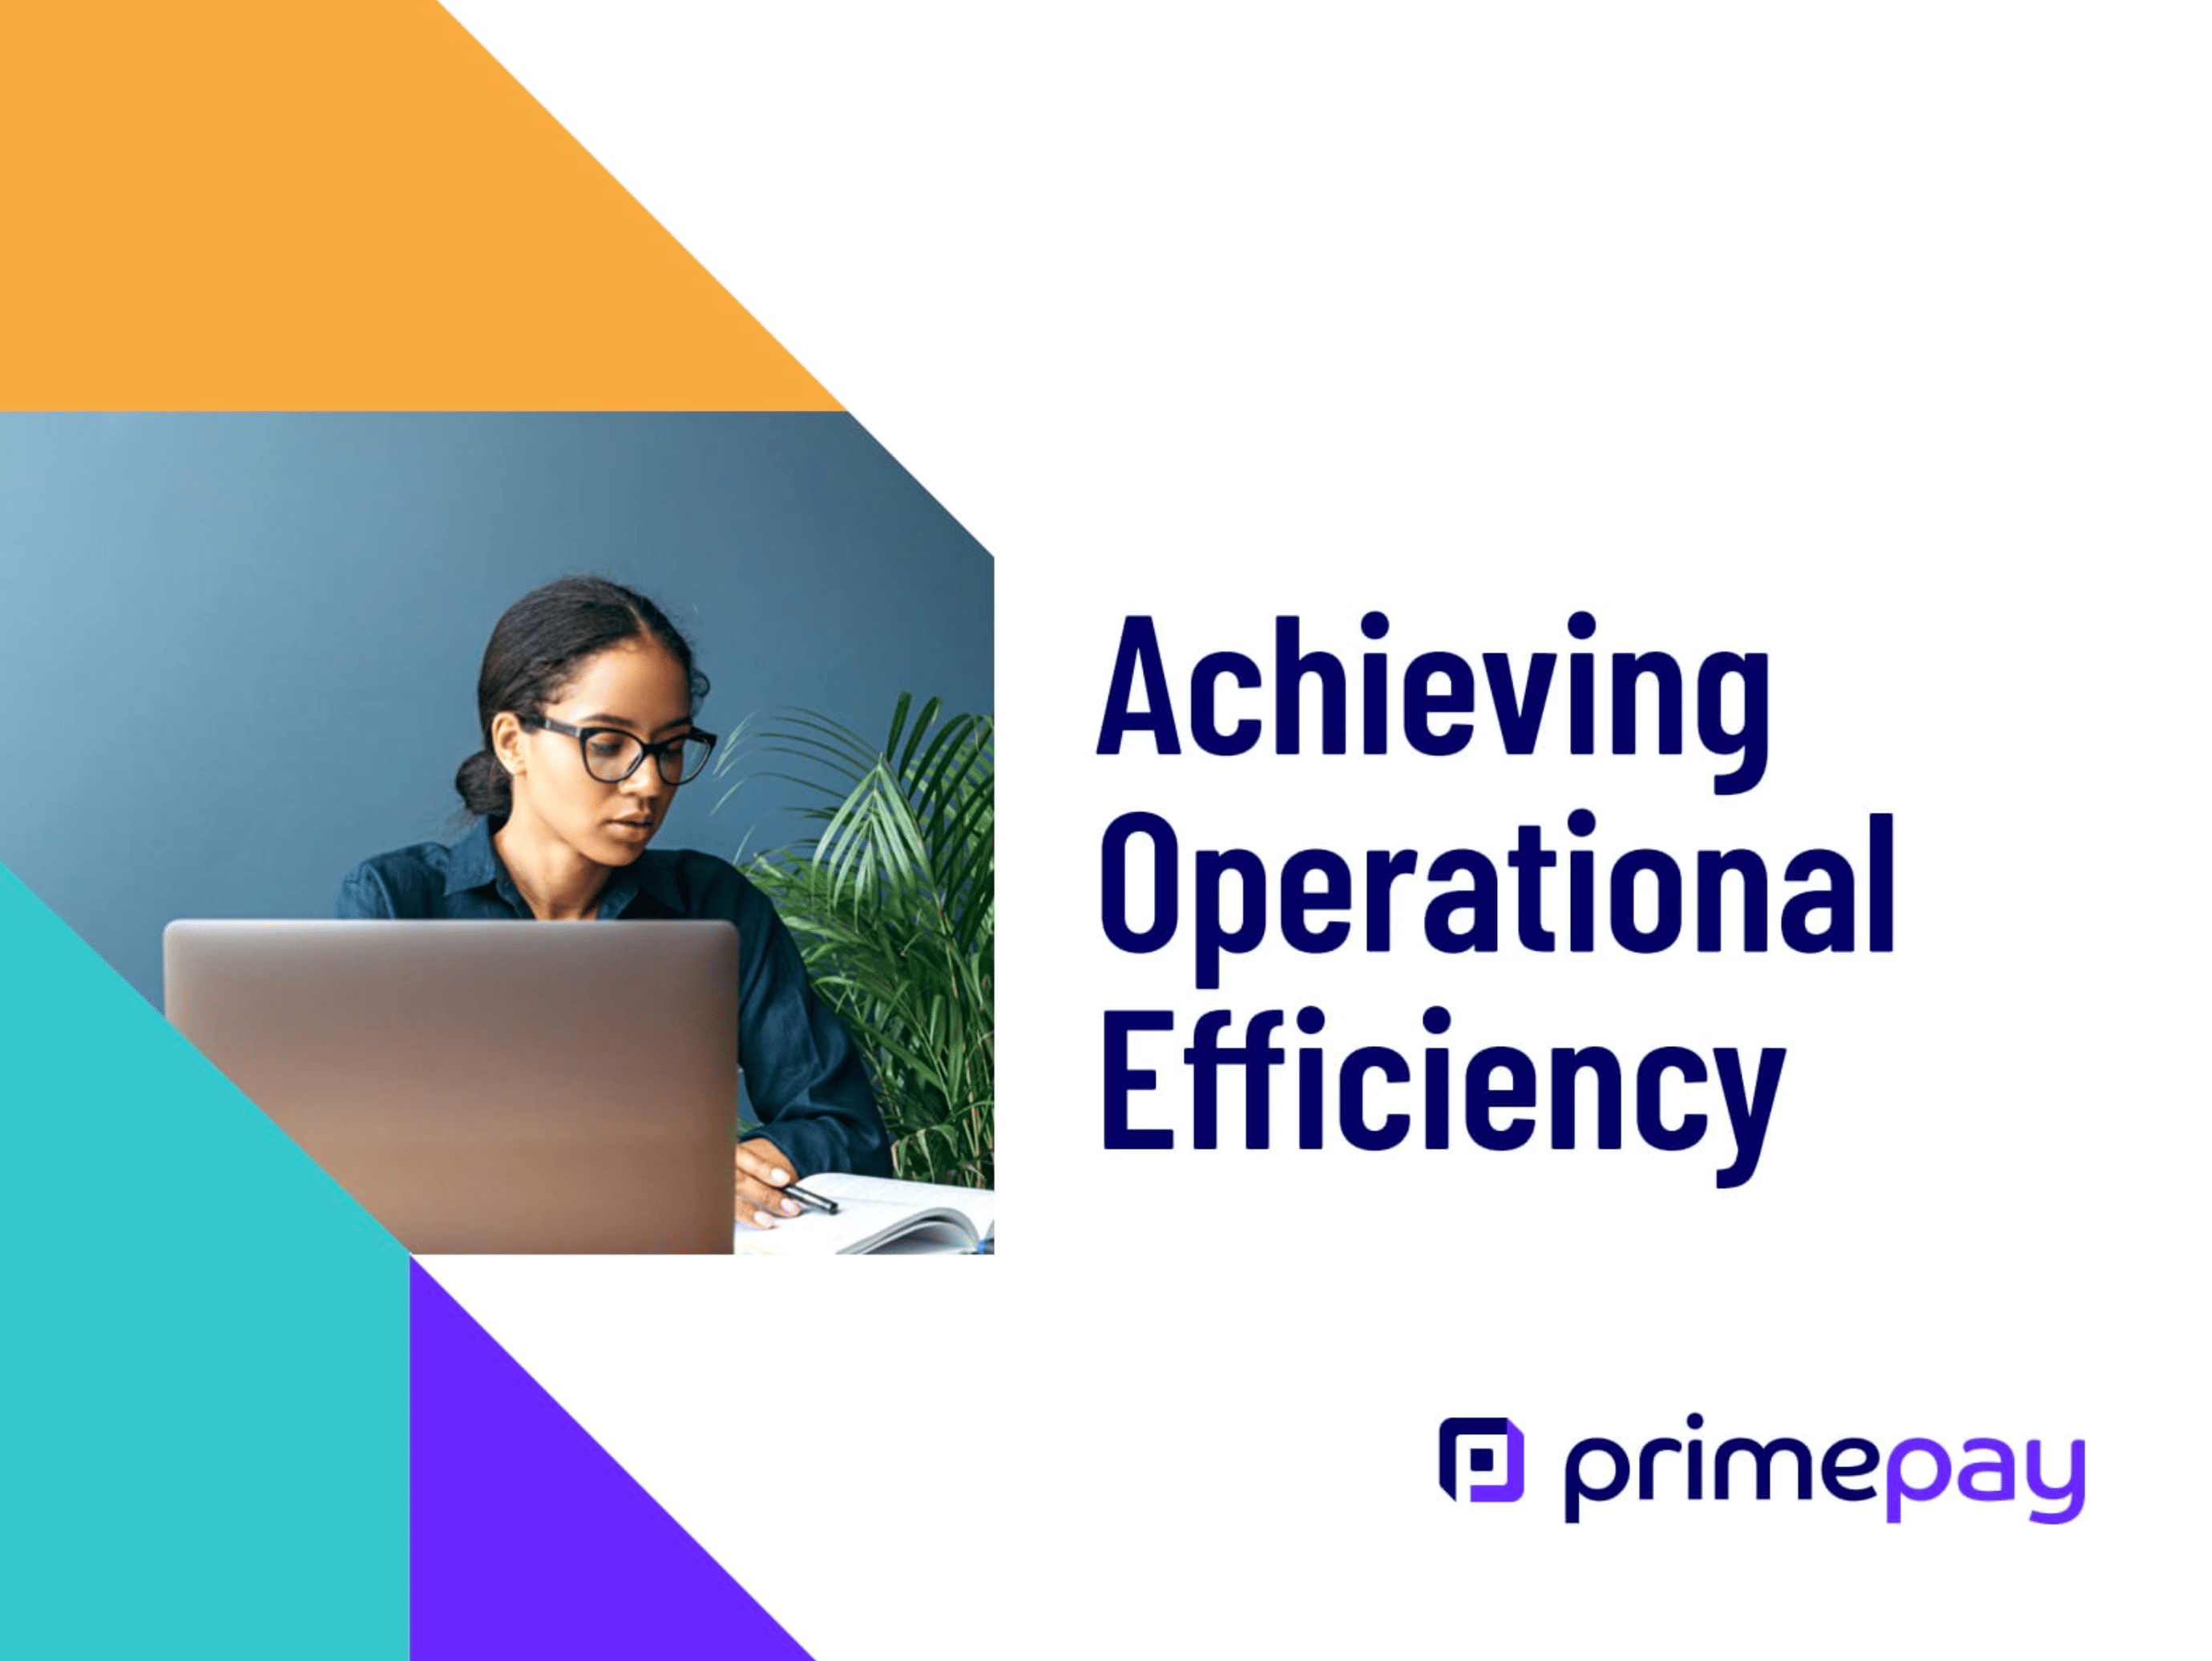 Power of Operational Efficiency white paper cover image.